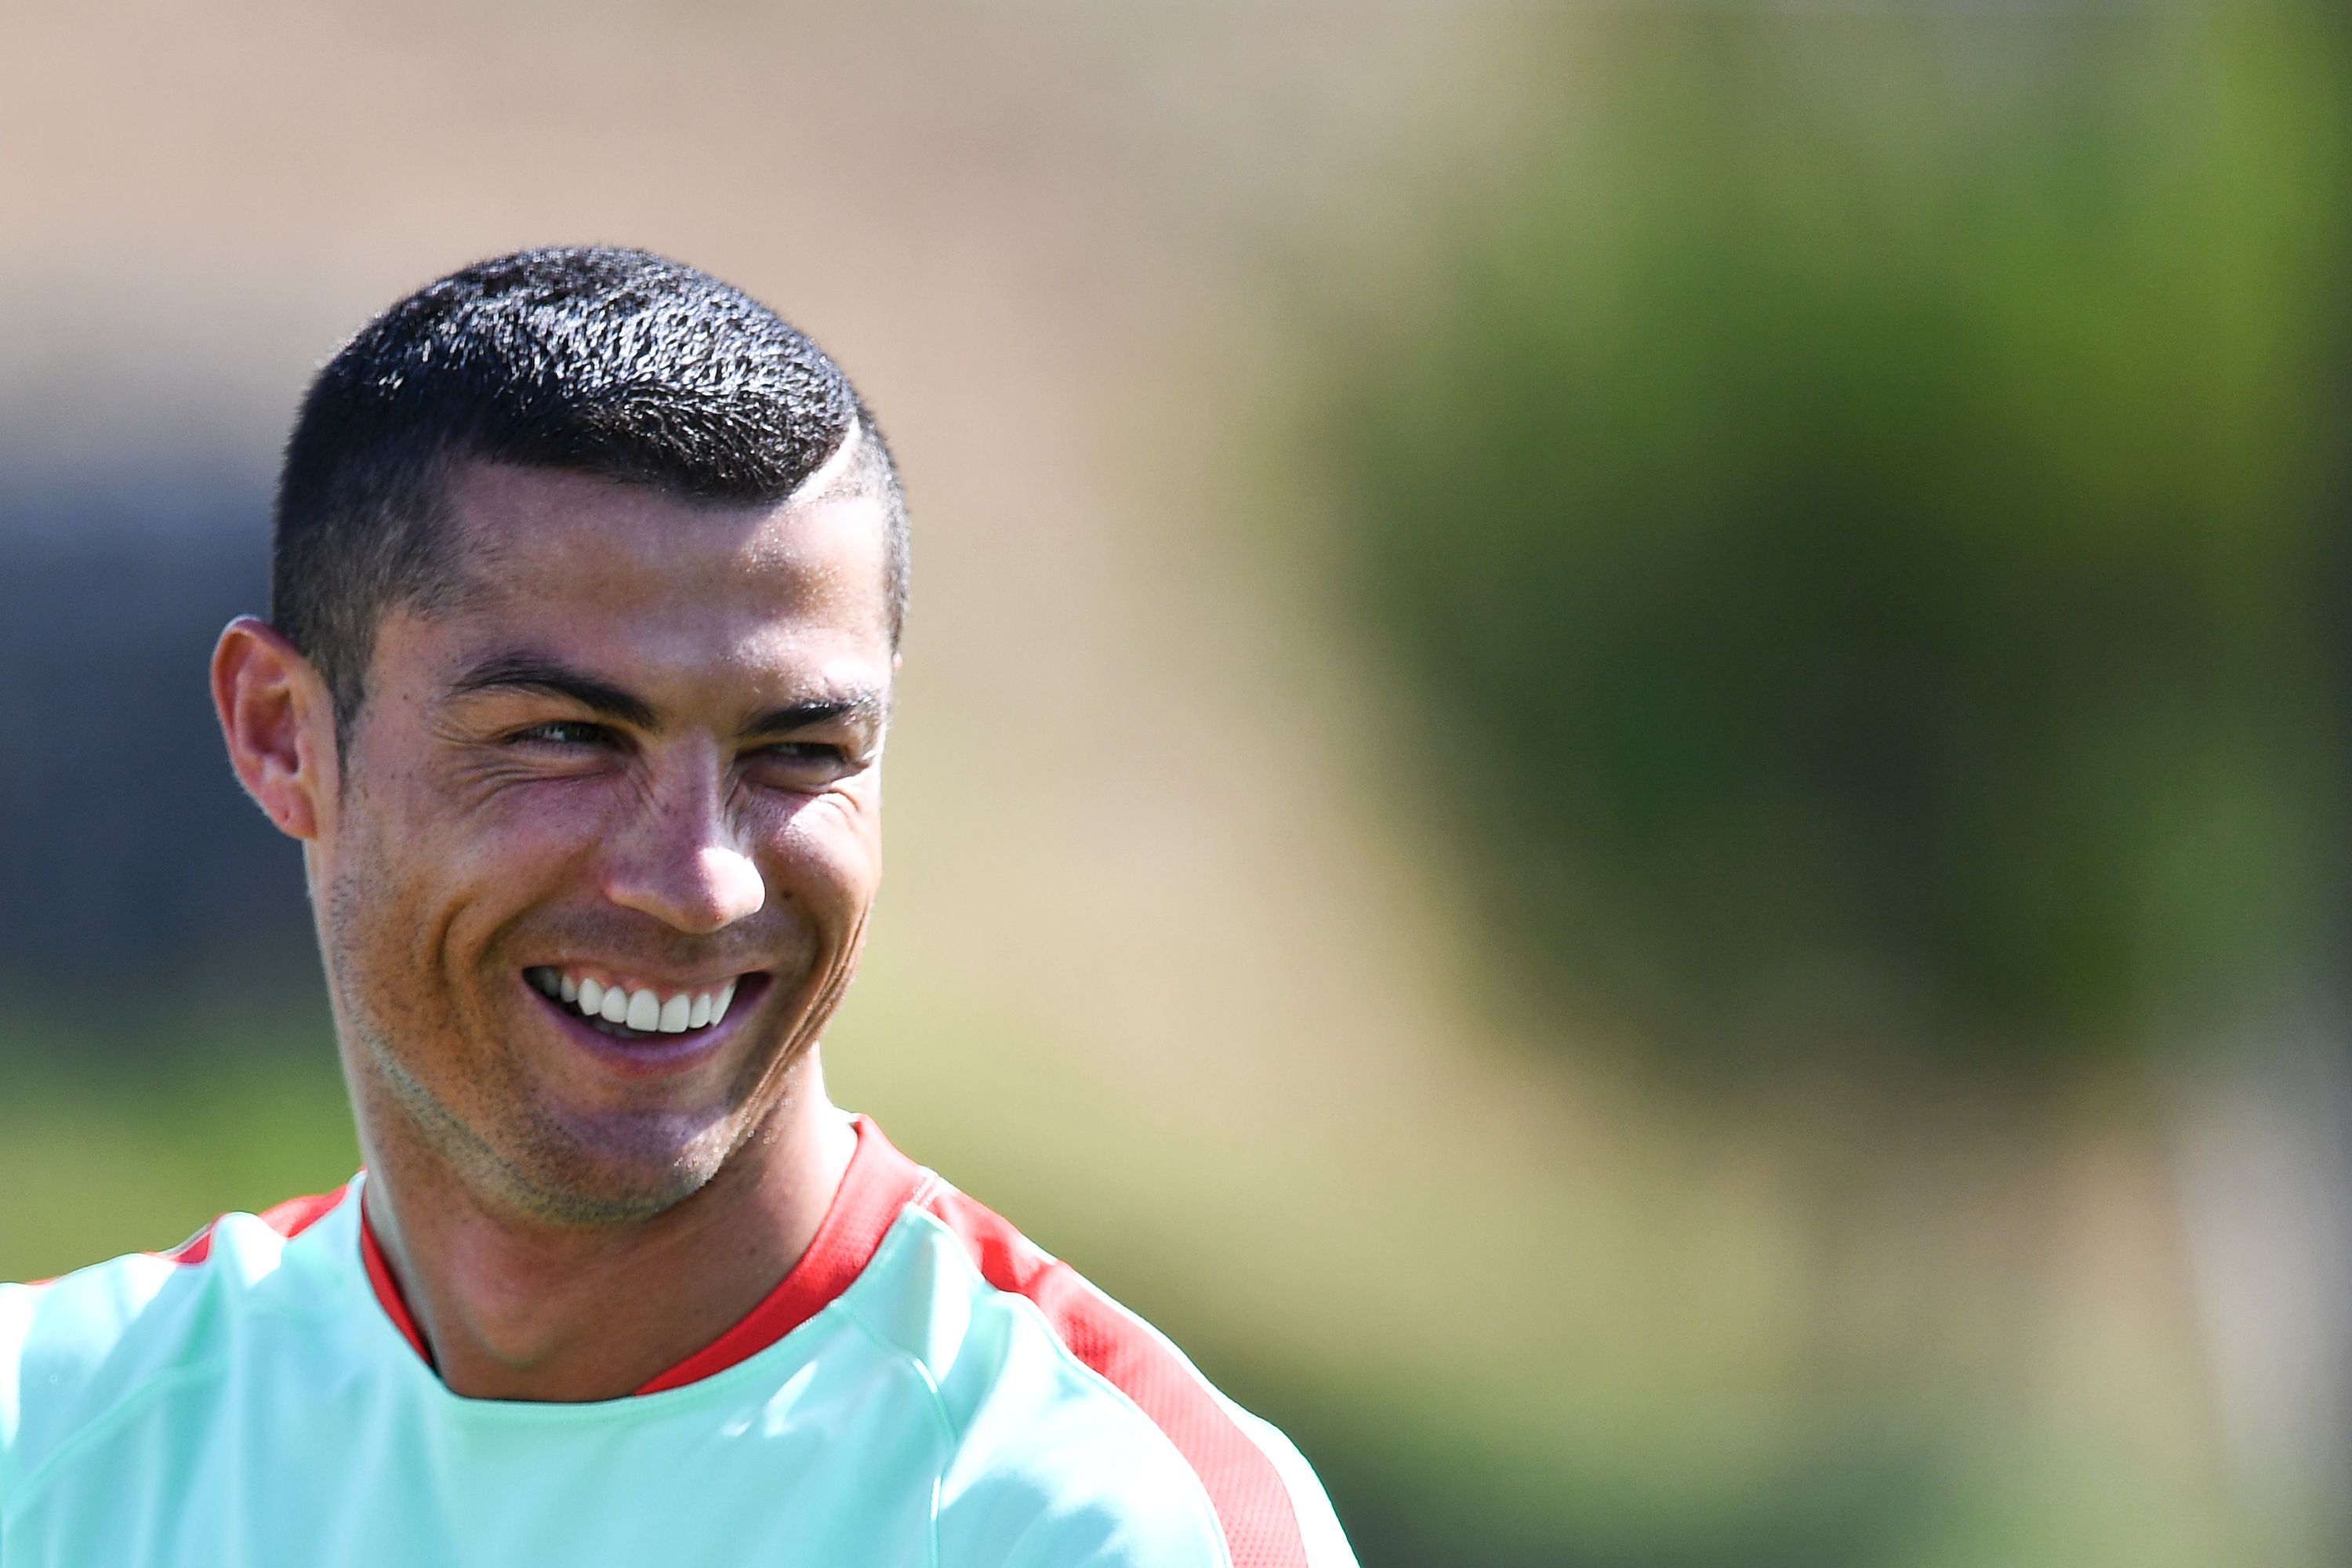 Portugal's forward Cristiano Ronaldo laughs during a training session at "Cidade do Futebol" training camp in Oeiras, outskirts of Lisbon, on June 14, 2017 ahead of the 2017 FIFA Confederations Cup football tournament in Russia which begins on June 17. / AFP PHOTO / PATRICIA DE MELO MOREIRA        (Photo credit should read PATRICIA DE MELO MOREIRA/AFP/Getty Images)